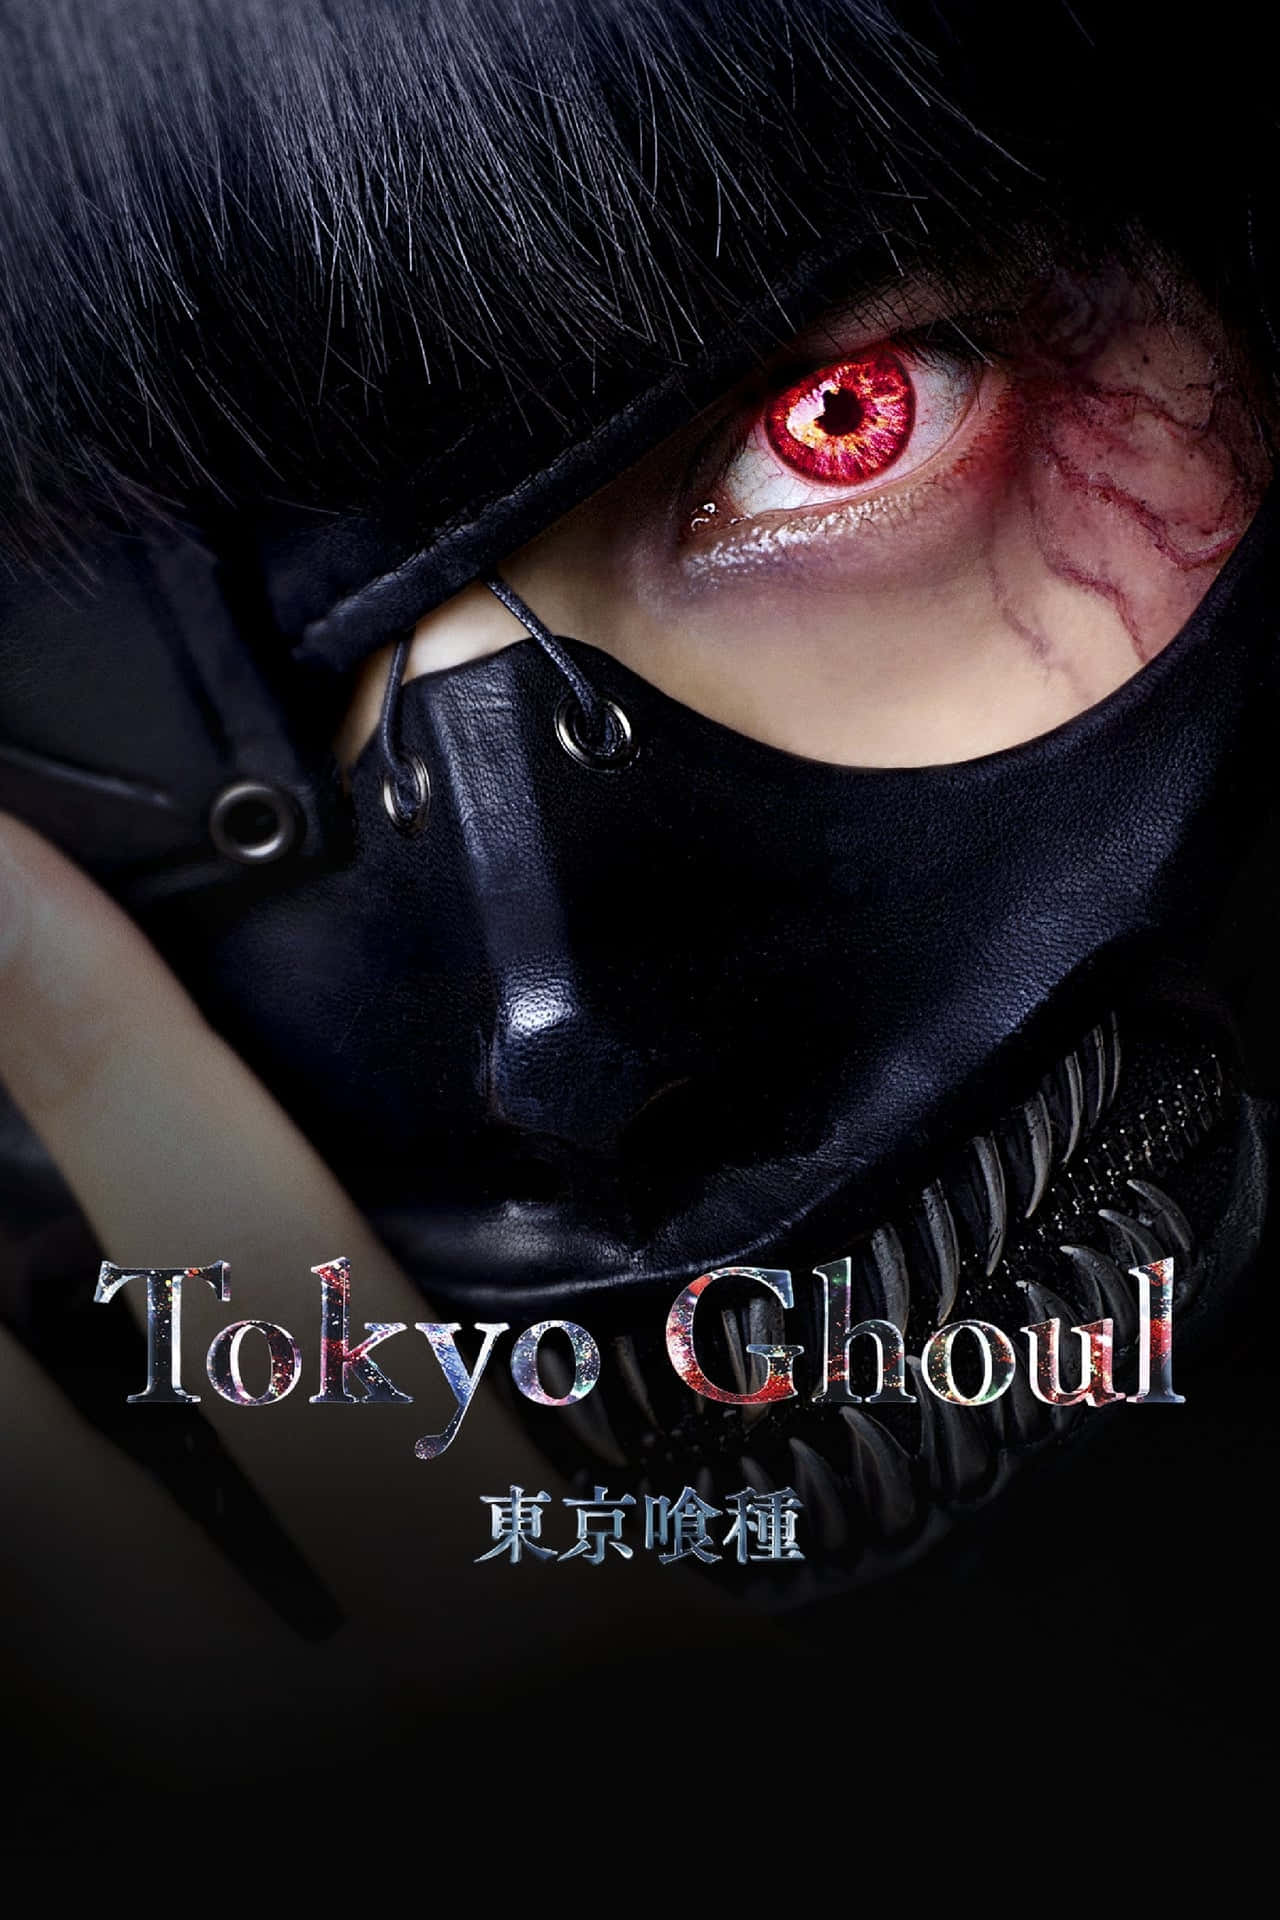 Stylishly Gritty - Tokyo Ghoul Movie Wallpaper